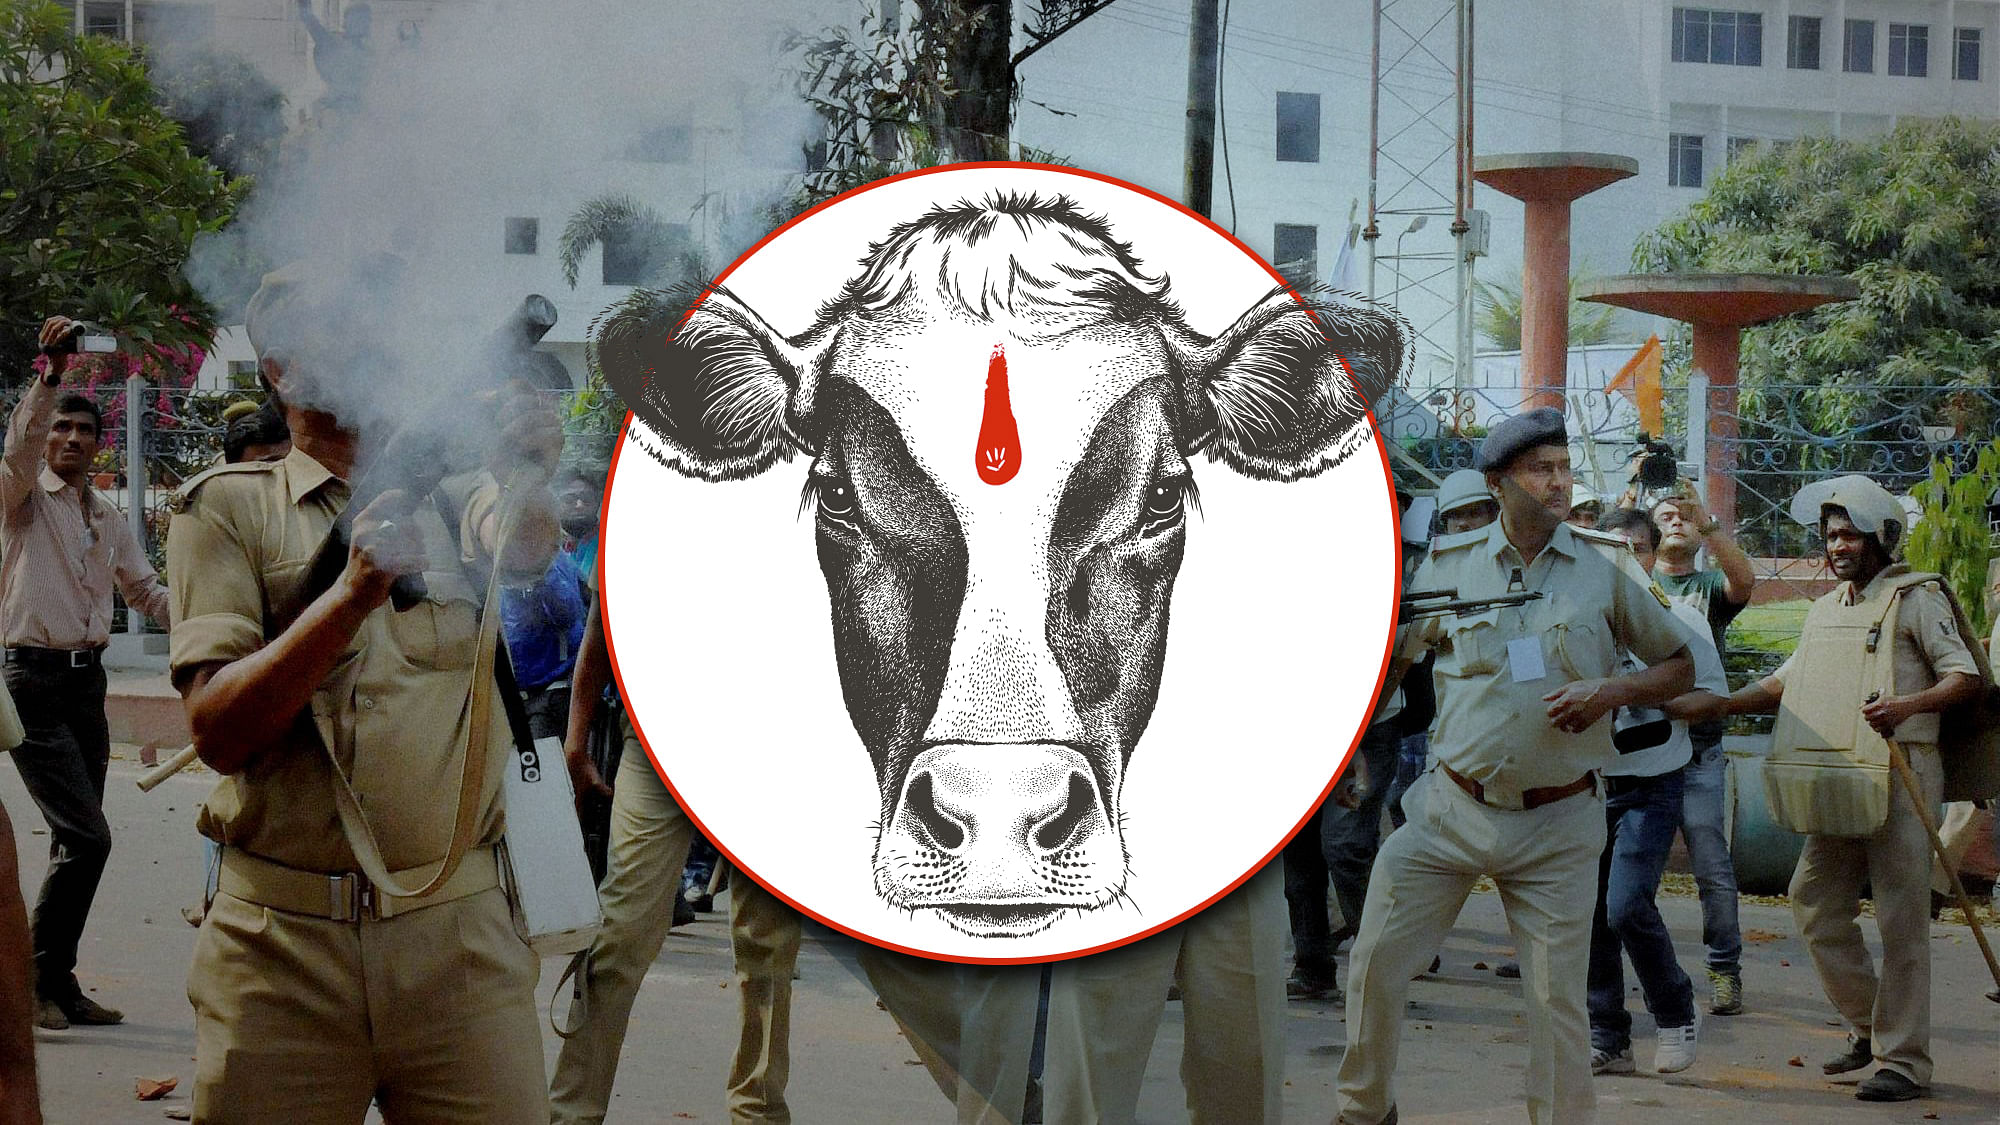 FIR for cow slaughter against Akhlaq and kin will lead to further marginalisation of the minorities. (Photo: Rahul Gupta/ <b>The Quint</b>)